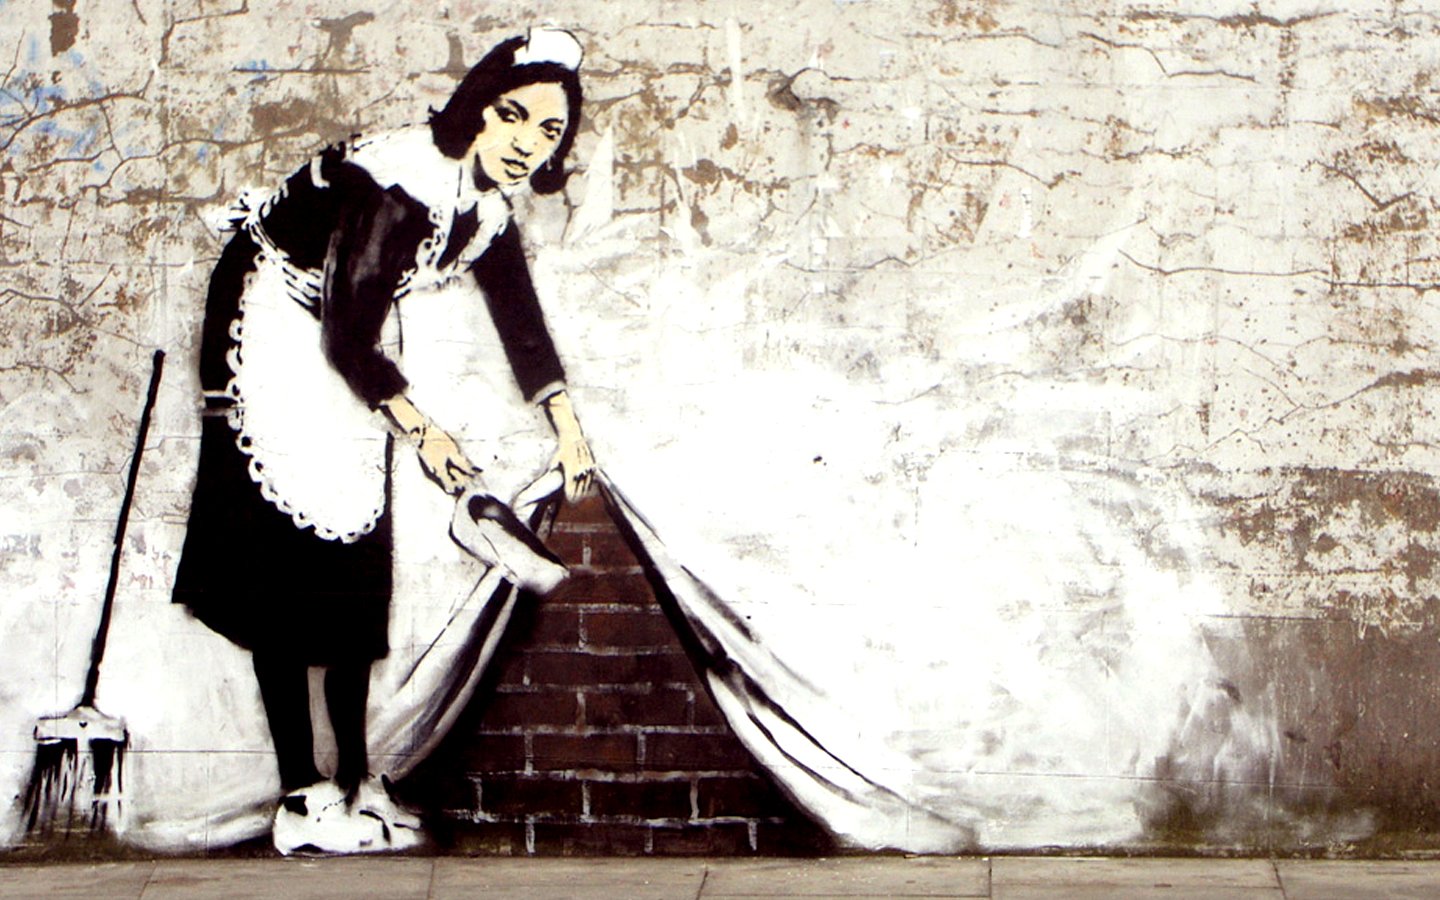 A Banksy artwork of a maid sweeping under a rug.